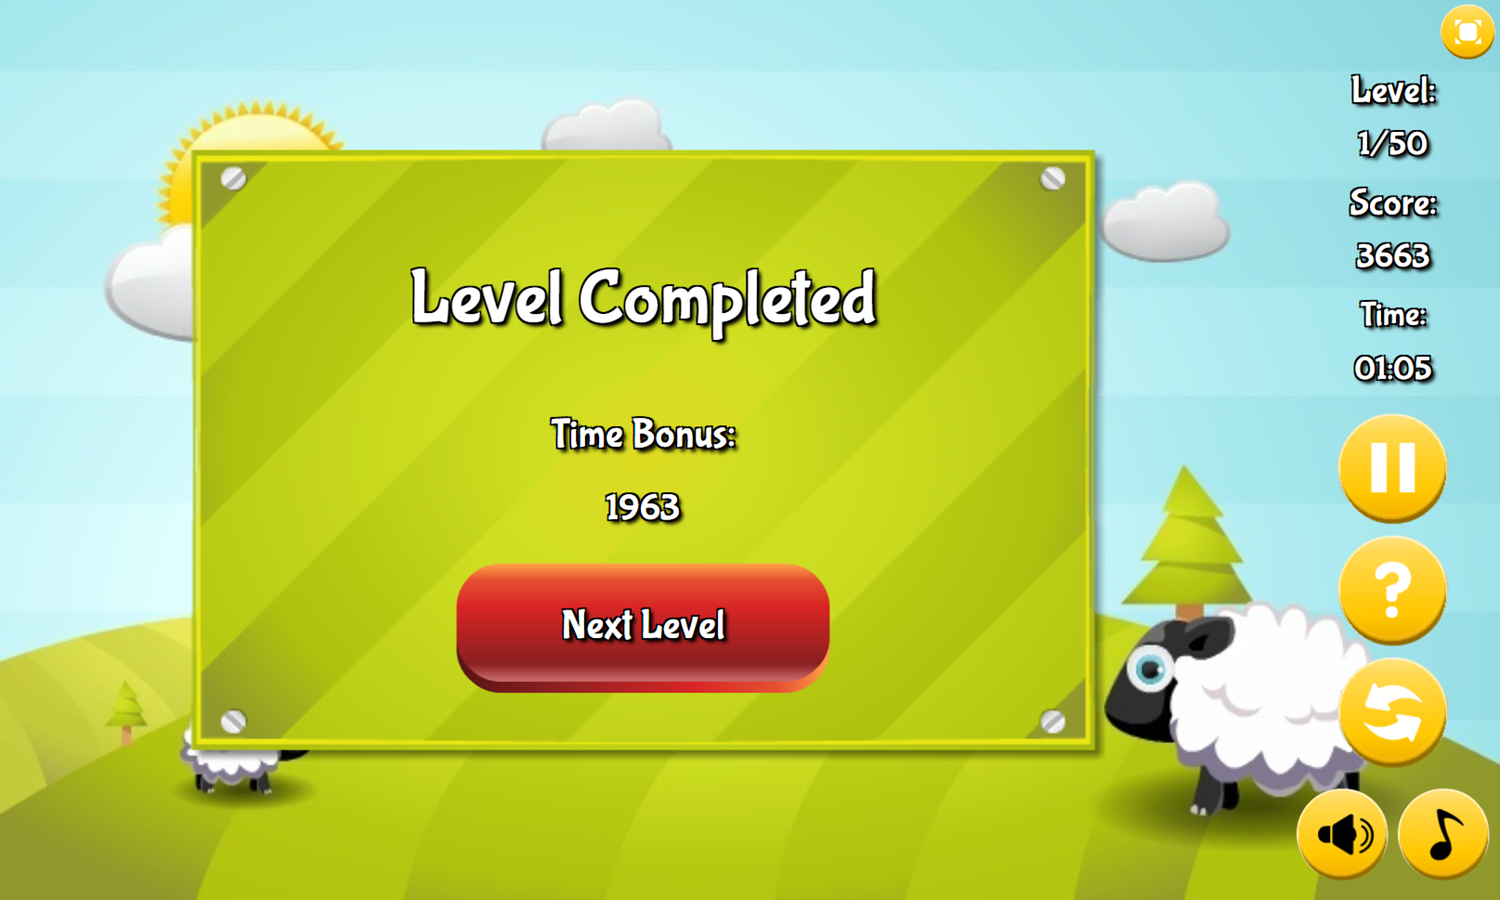 Opposites Attract Game Level Completed Screenshot.